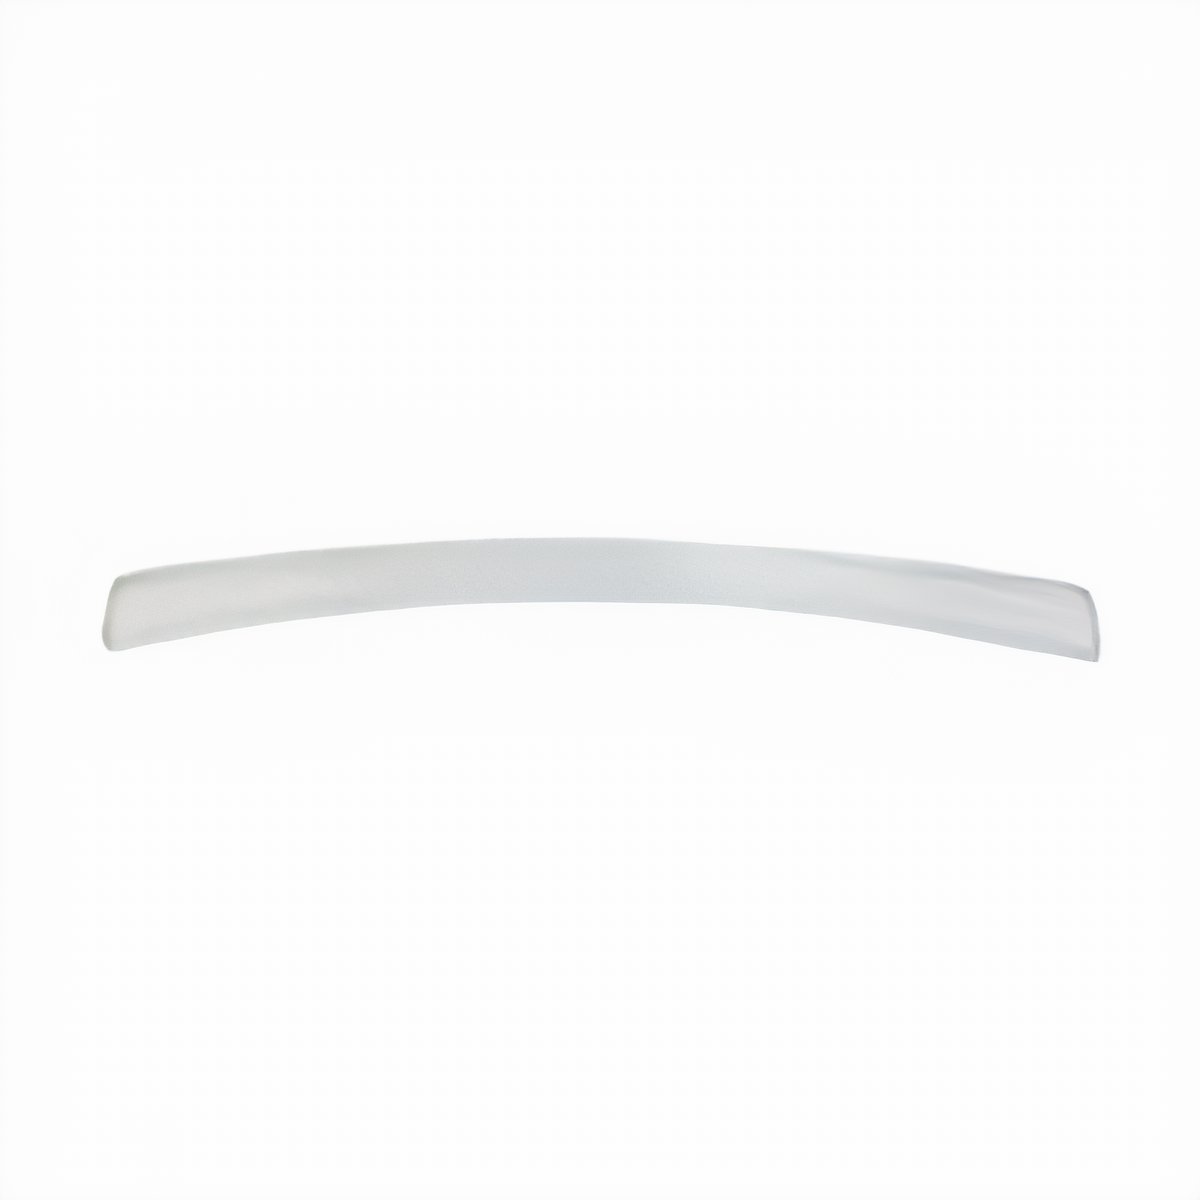 1972 VW Super Beetle Convertible Header Bow Cover - White